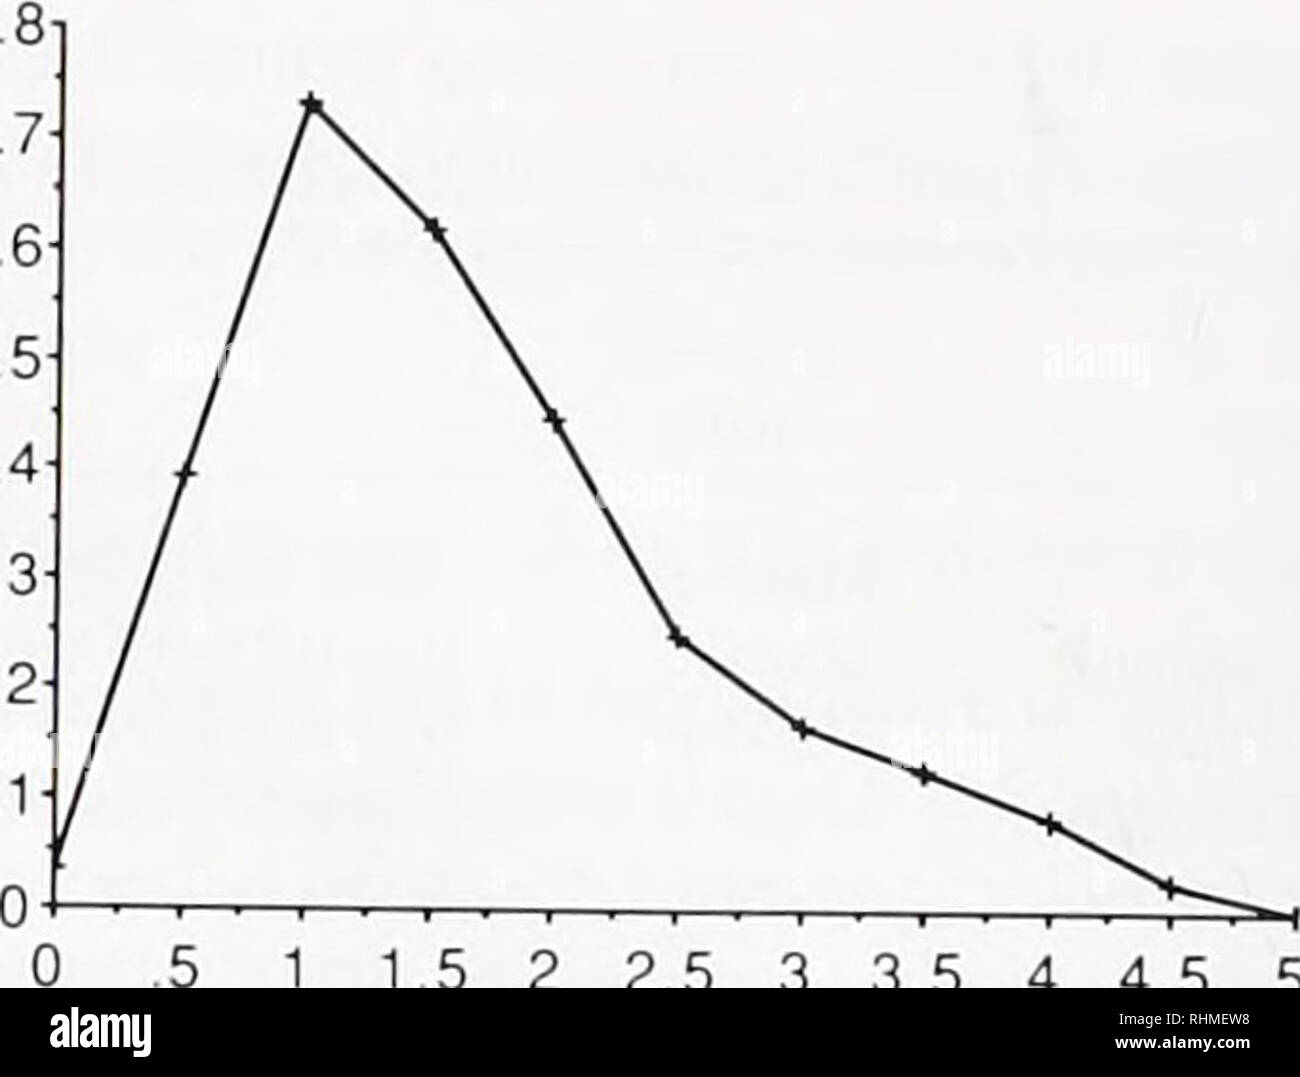 . The Biological bulletin. Biology; Zoology; Biology; Marine Biology. Location within fertile zone Figure 3. Fecundity gradient on horizontal surface of Siclcrastrea ulercii Gonad index: mean gonad length X frequency of gonads (ovaries or spermaries), based on two randomly chosen mesenteries per polyp in each of ten randomly chosen polyps) at any given location relative to that in the center of the horizontal surface of the colony. Vertical bars represent the standard errors of the mean. 0: beginning of fertile zone, C: center of the horizontal surface, n = 8 male and 8 female colonies. •c 0) Stock Photo